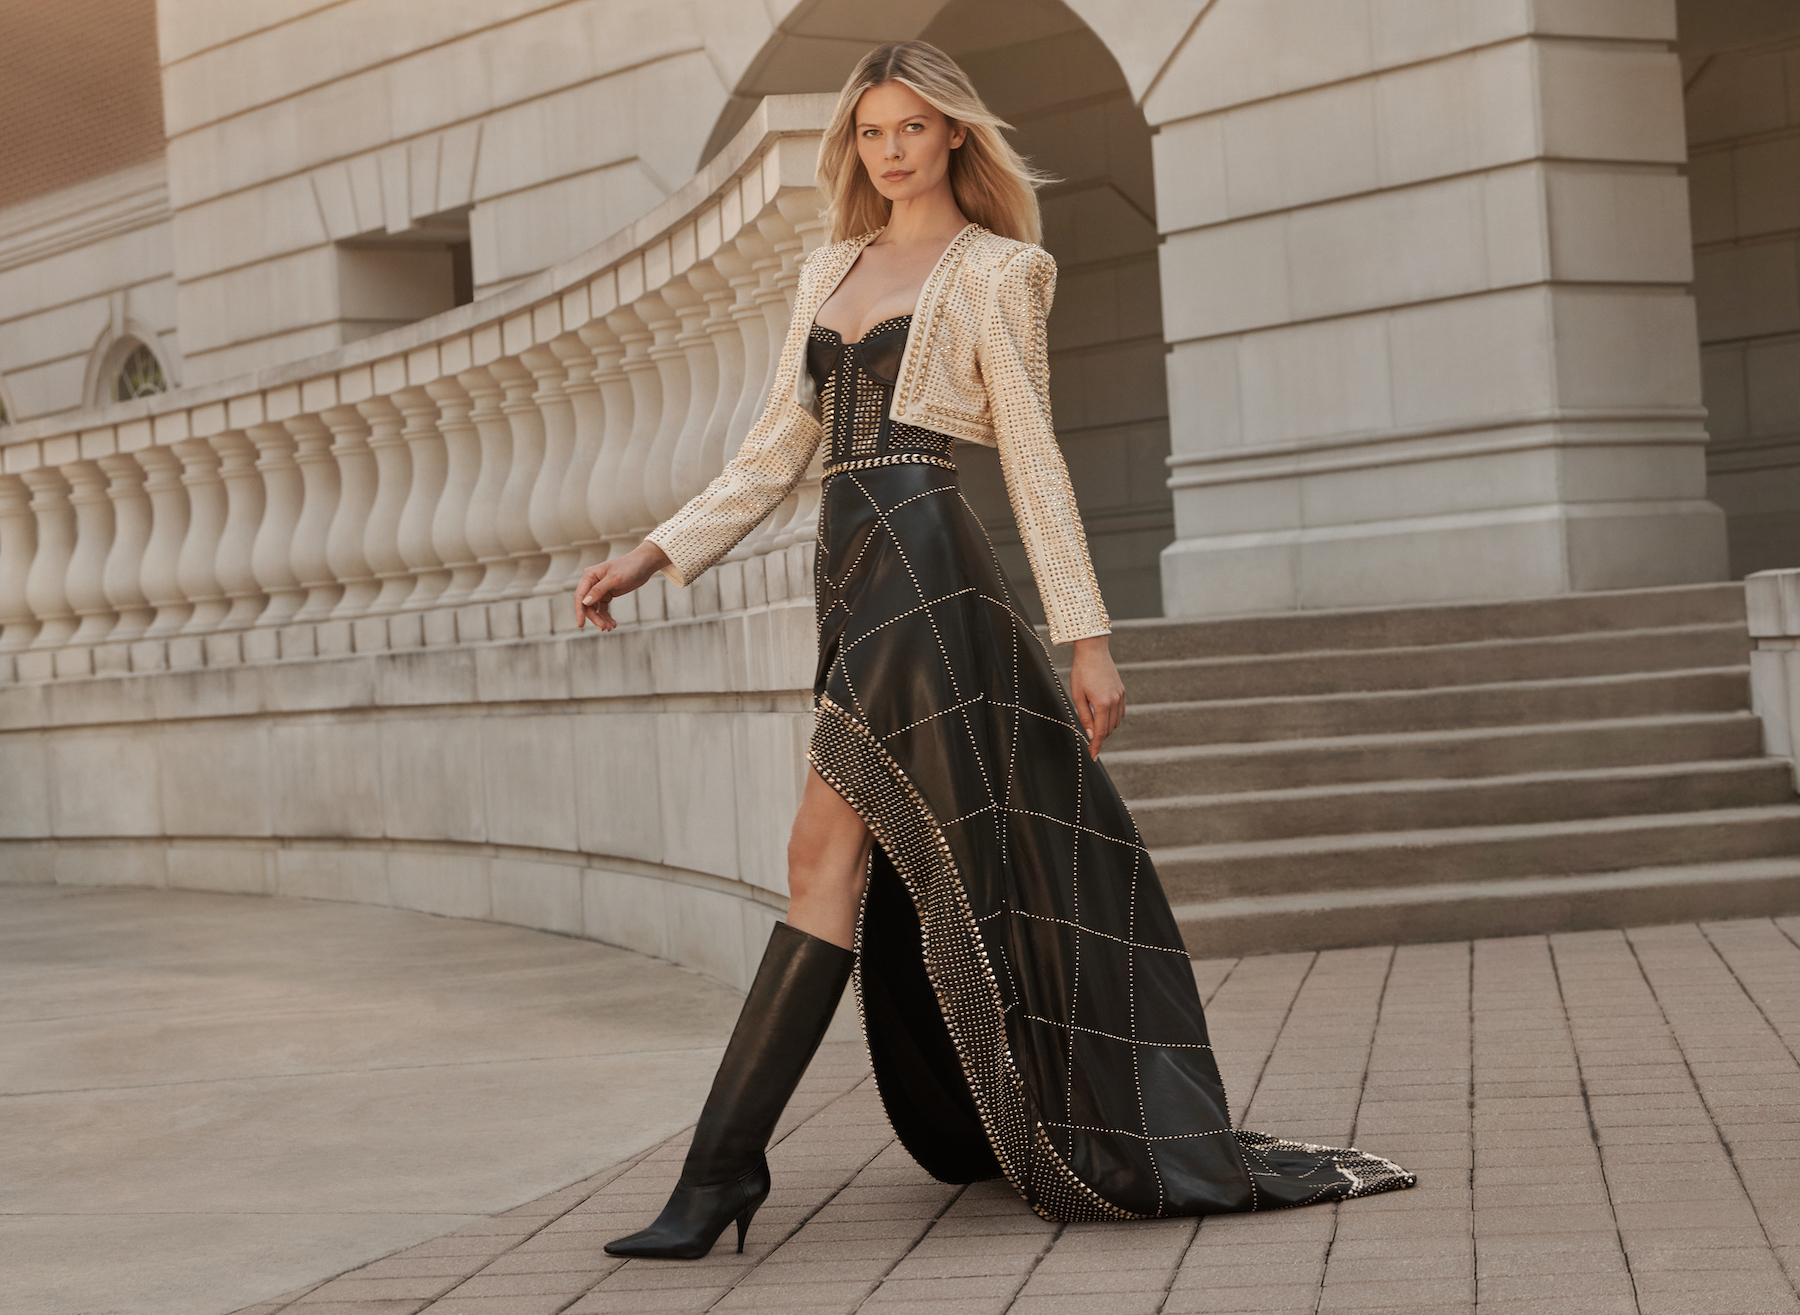 Discover the Season’s Latest Fashion Trends with Highland Park Village ...